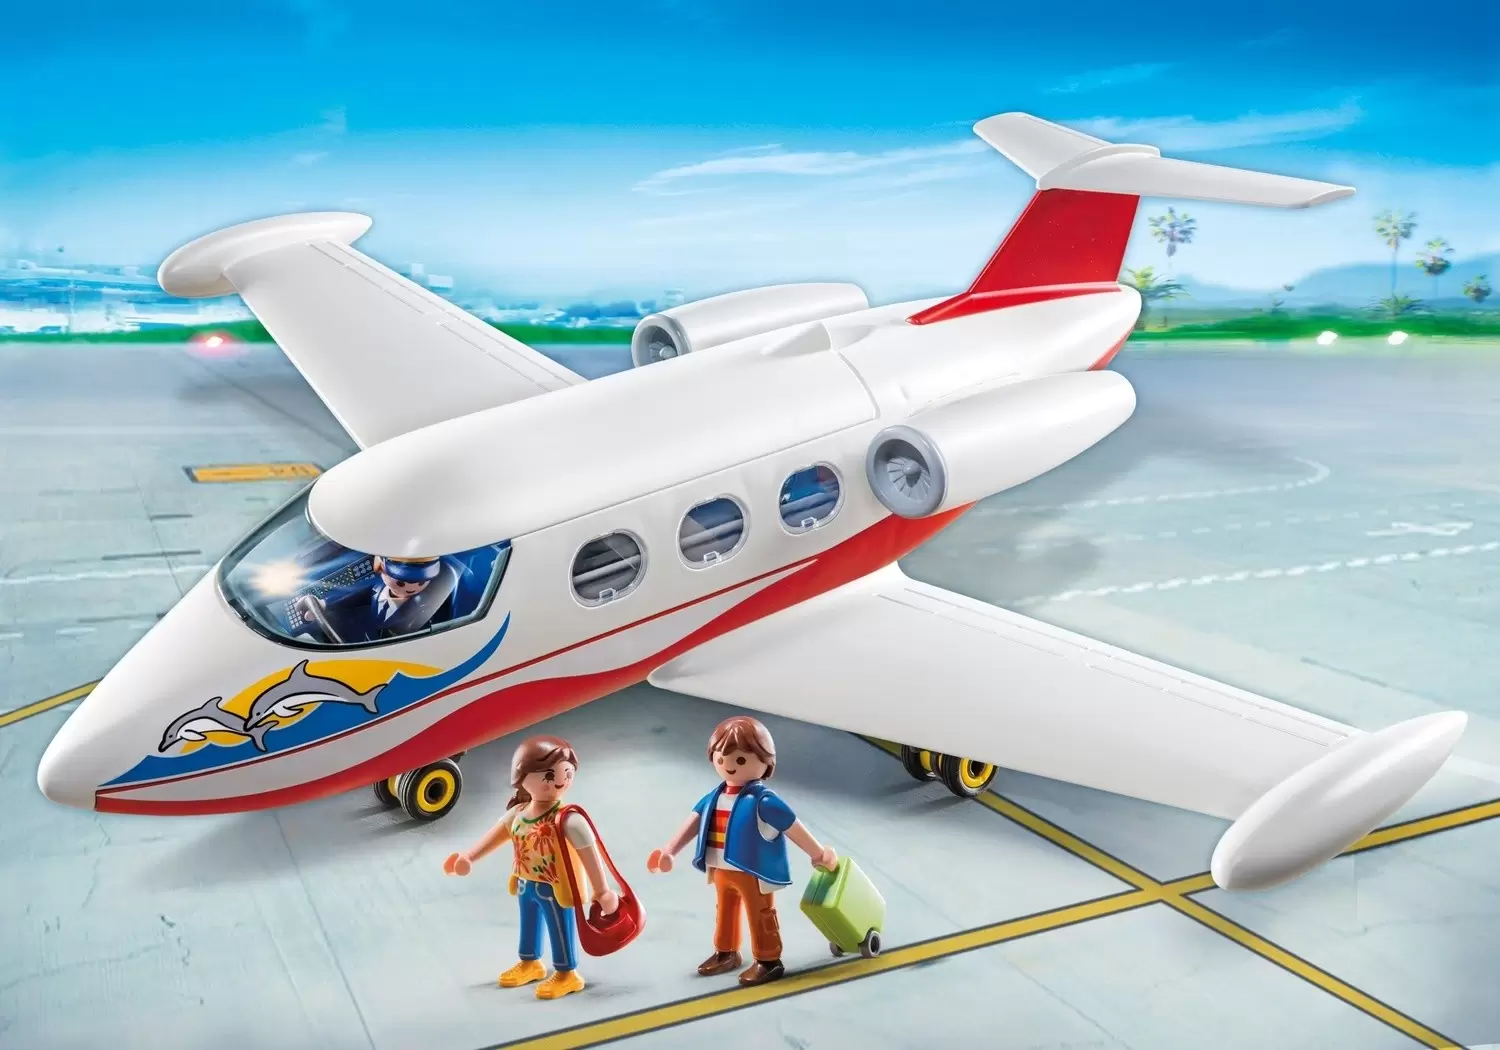 Playmobil Airport & Planes - Plane with Pilot and tourists